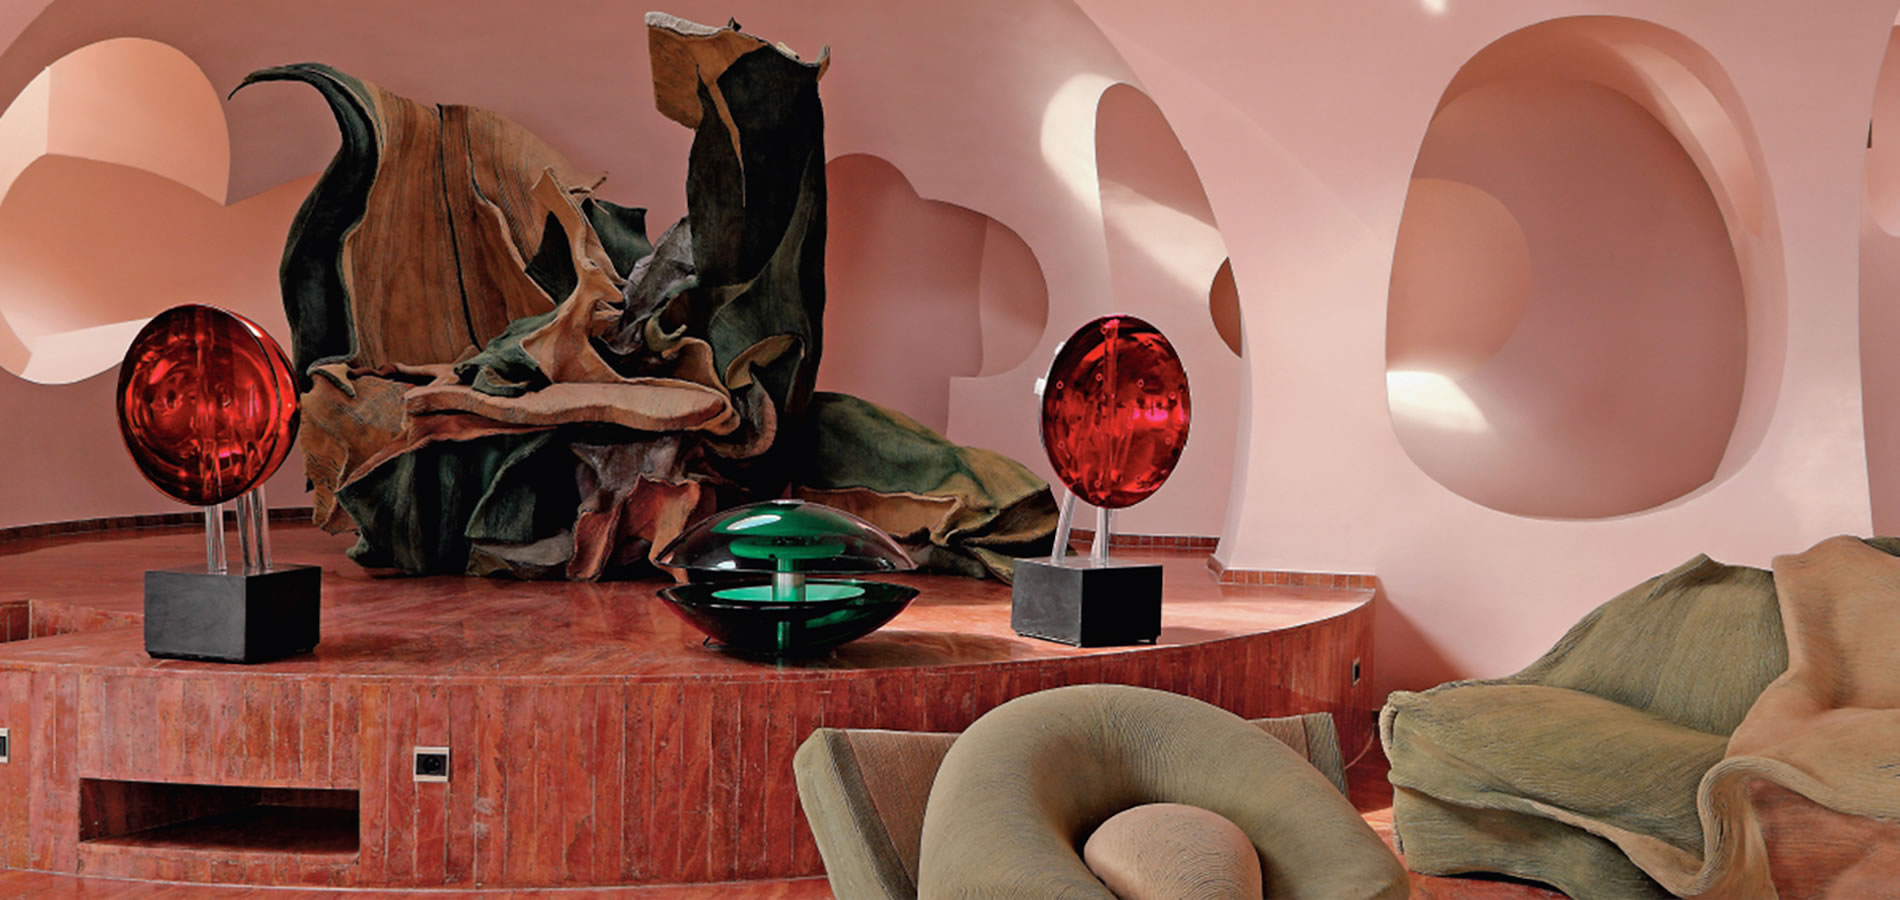 Living room in the Palais Bulles